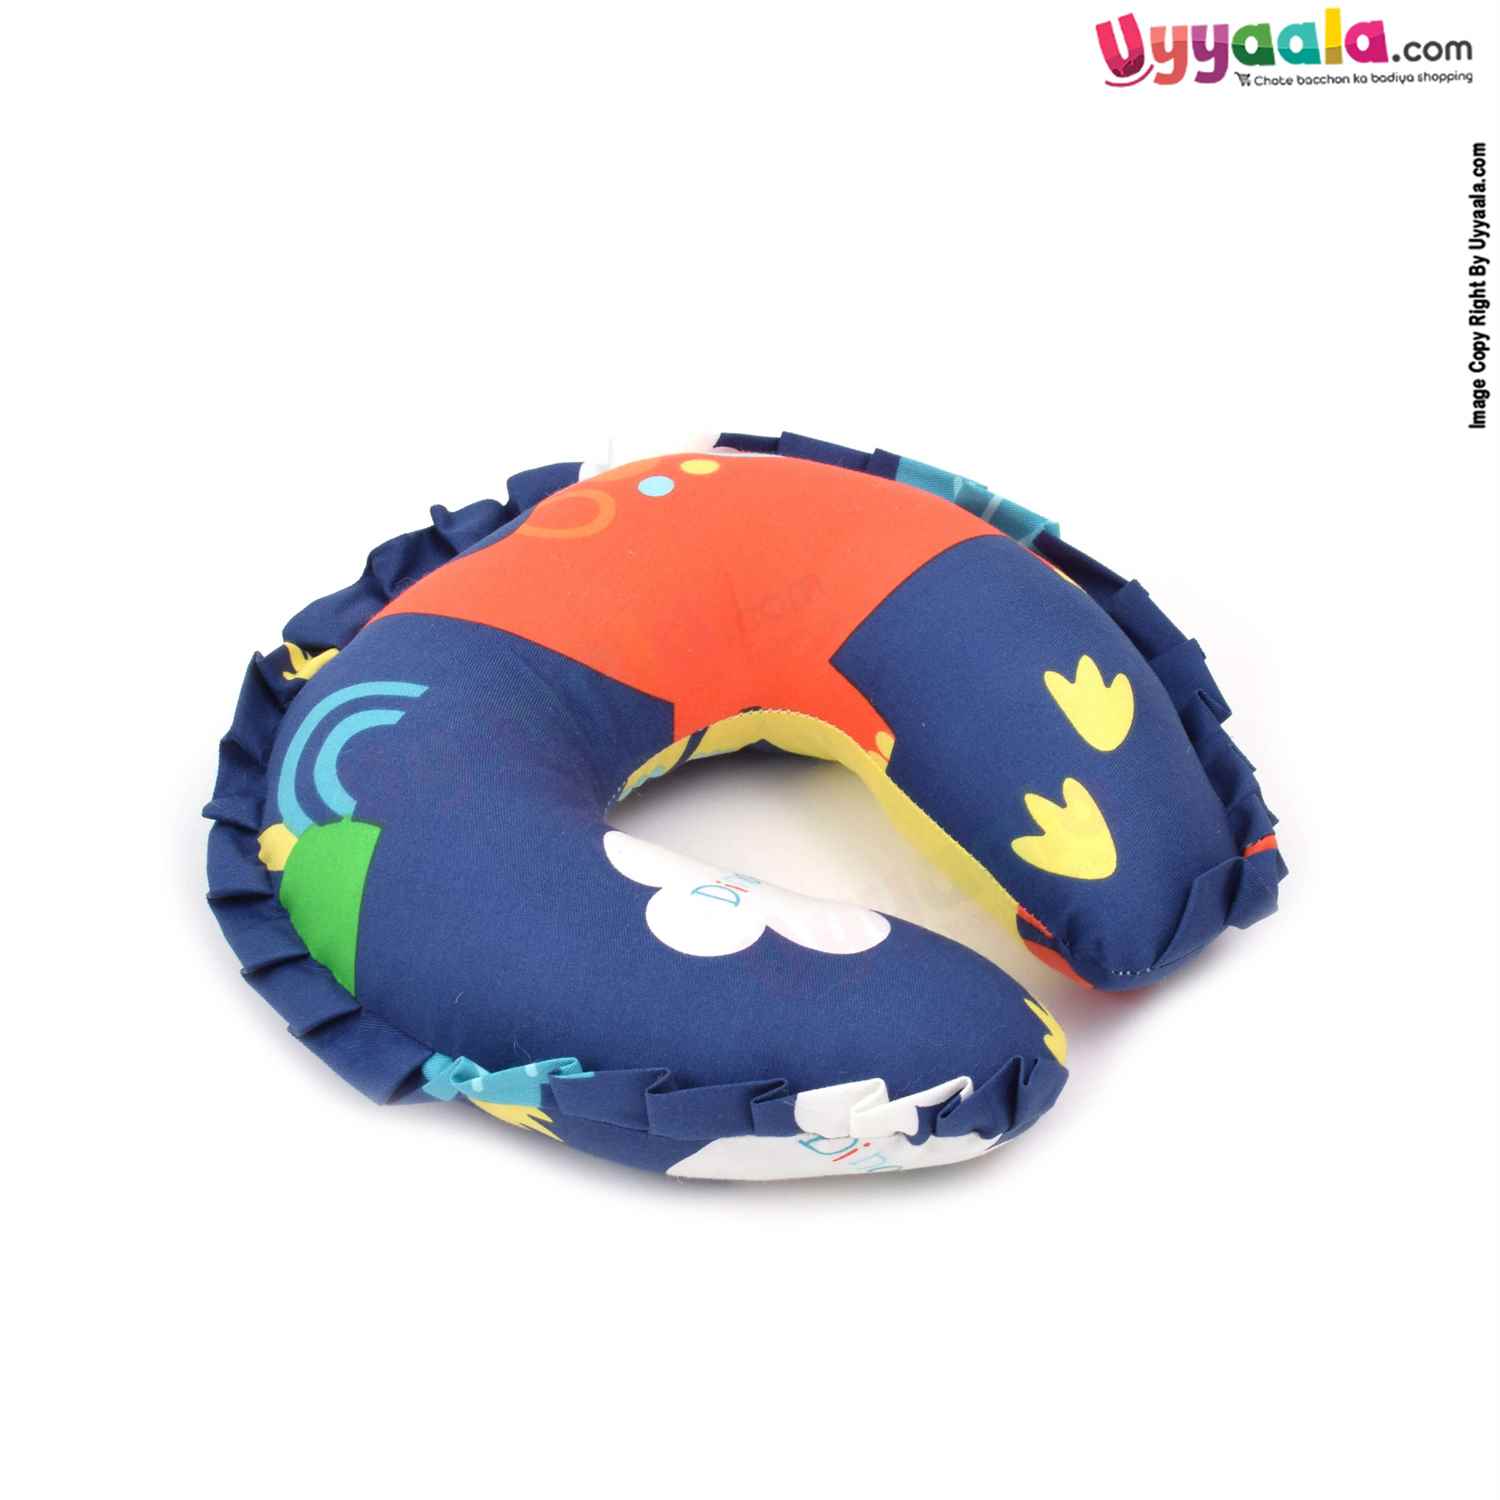 Baby Neck Pillow Cotton Horse - Shoe Shaped for Babies with Print 0+m Age, Size(23*23cm)